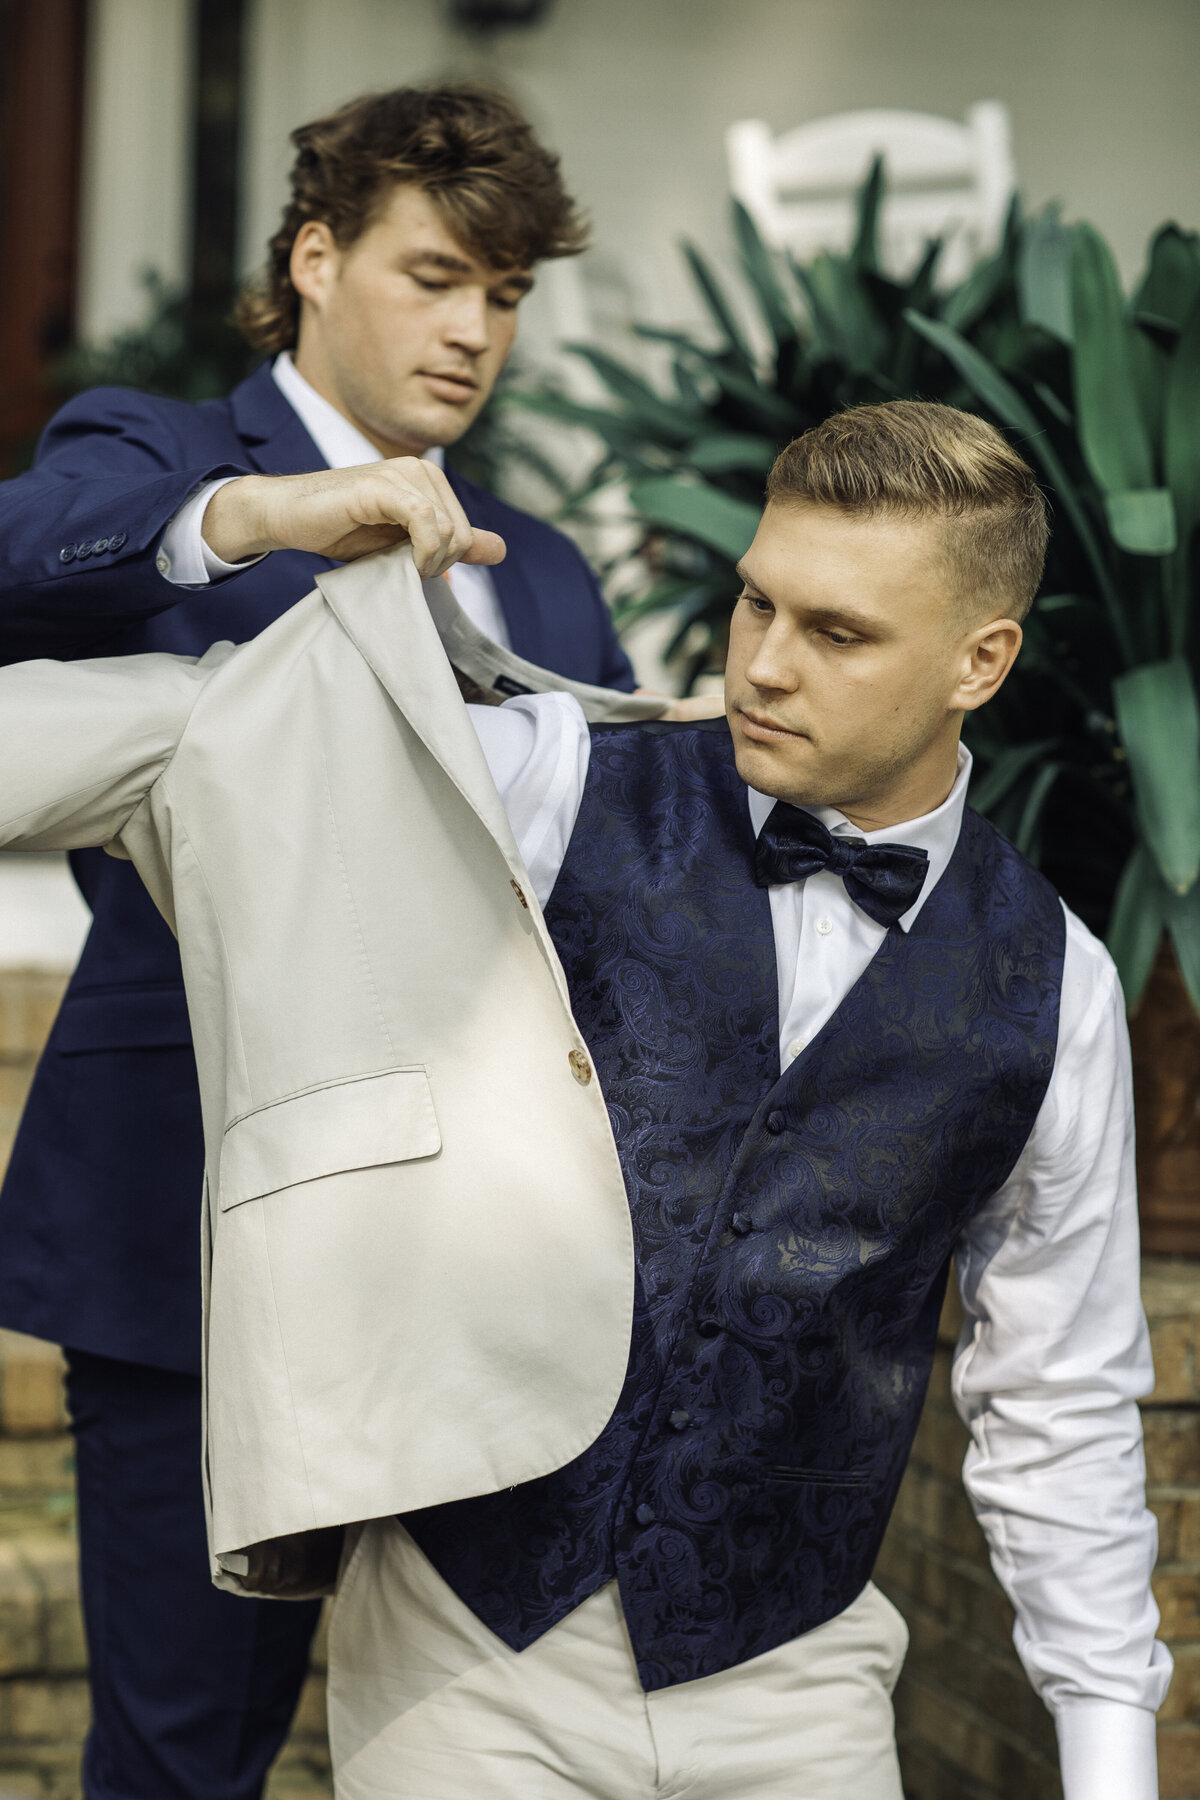 Wedding Photograph Of Man Helping Groom Put His Suit On Los Angeles